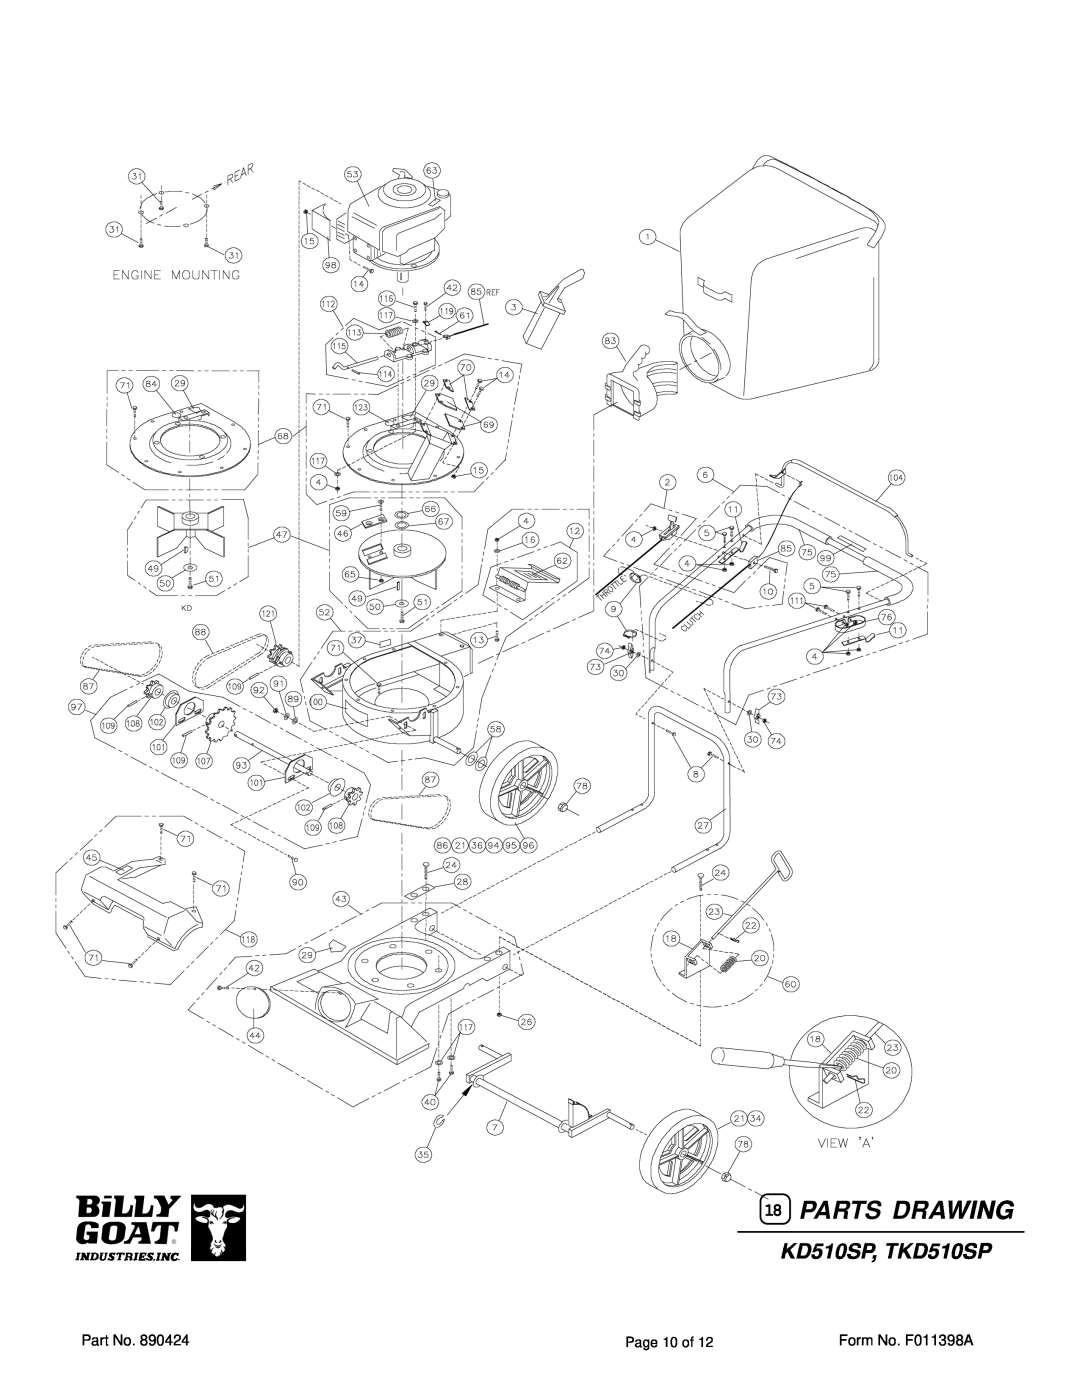 Billy Goat KD510SP, TKD510SP specifications 18PARTS DRAWING 